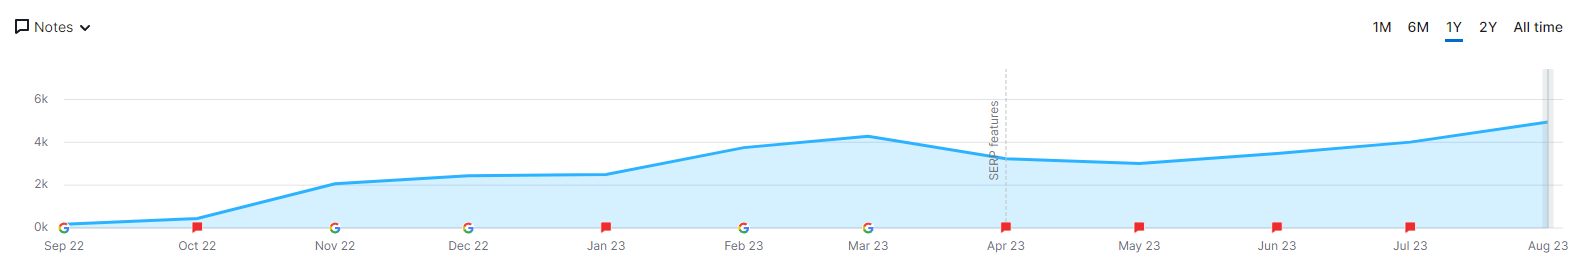 Graph of Performance Lab of California SEO case study, showcasing 3166.67% increase in traffic over time.